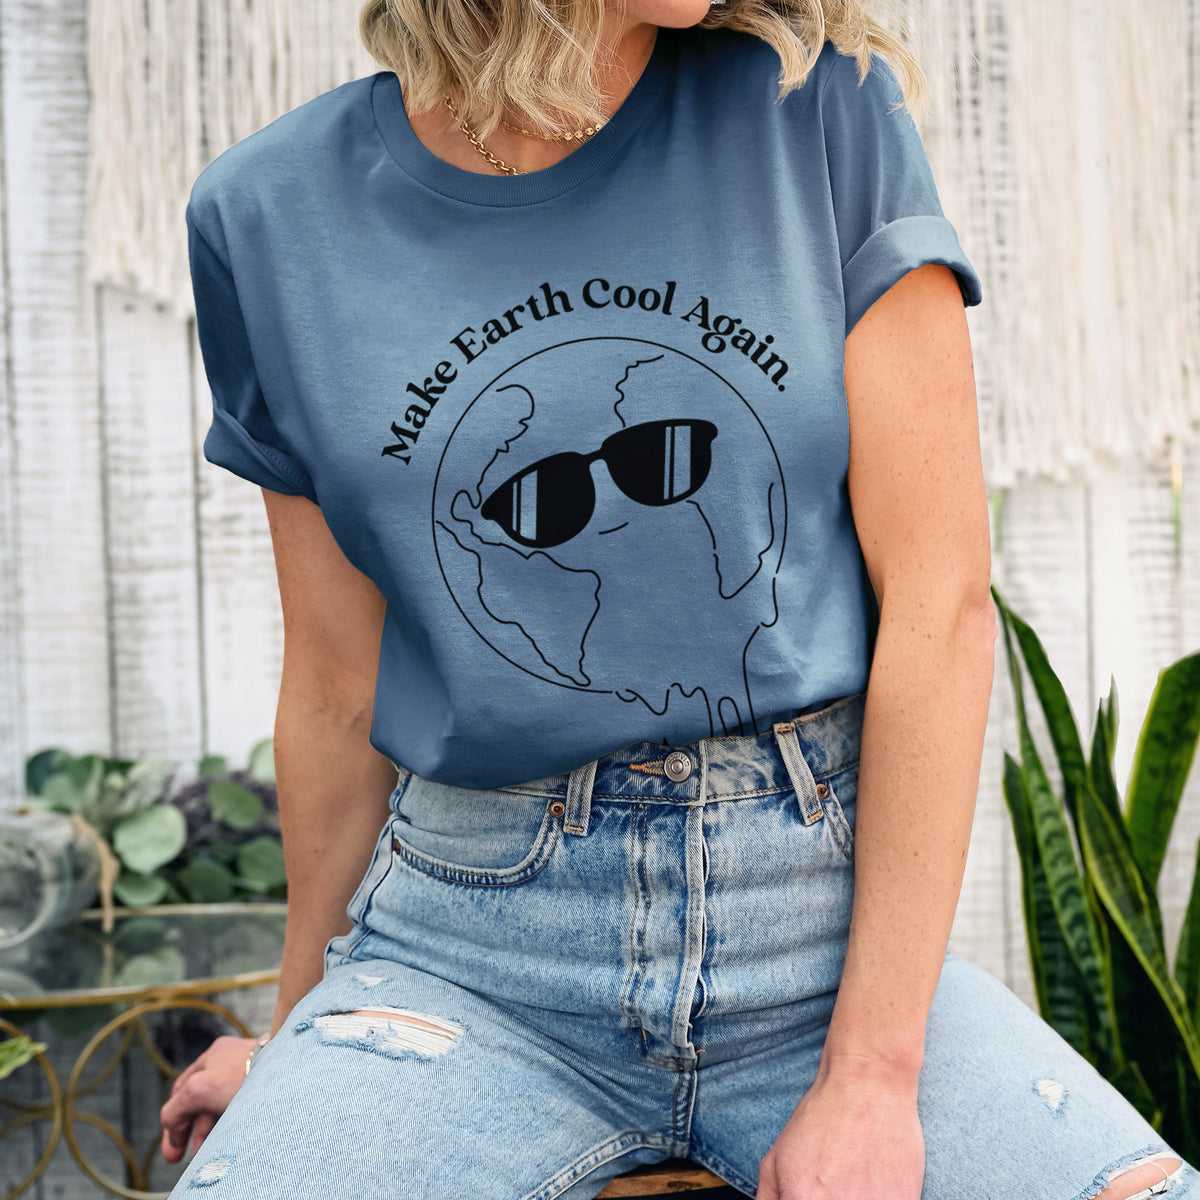 Make Earth Cool Again - Melted Planet - Lightweight 100% Cotton Unisex Crewneck